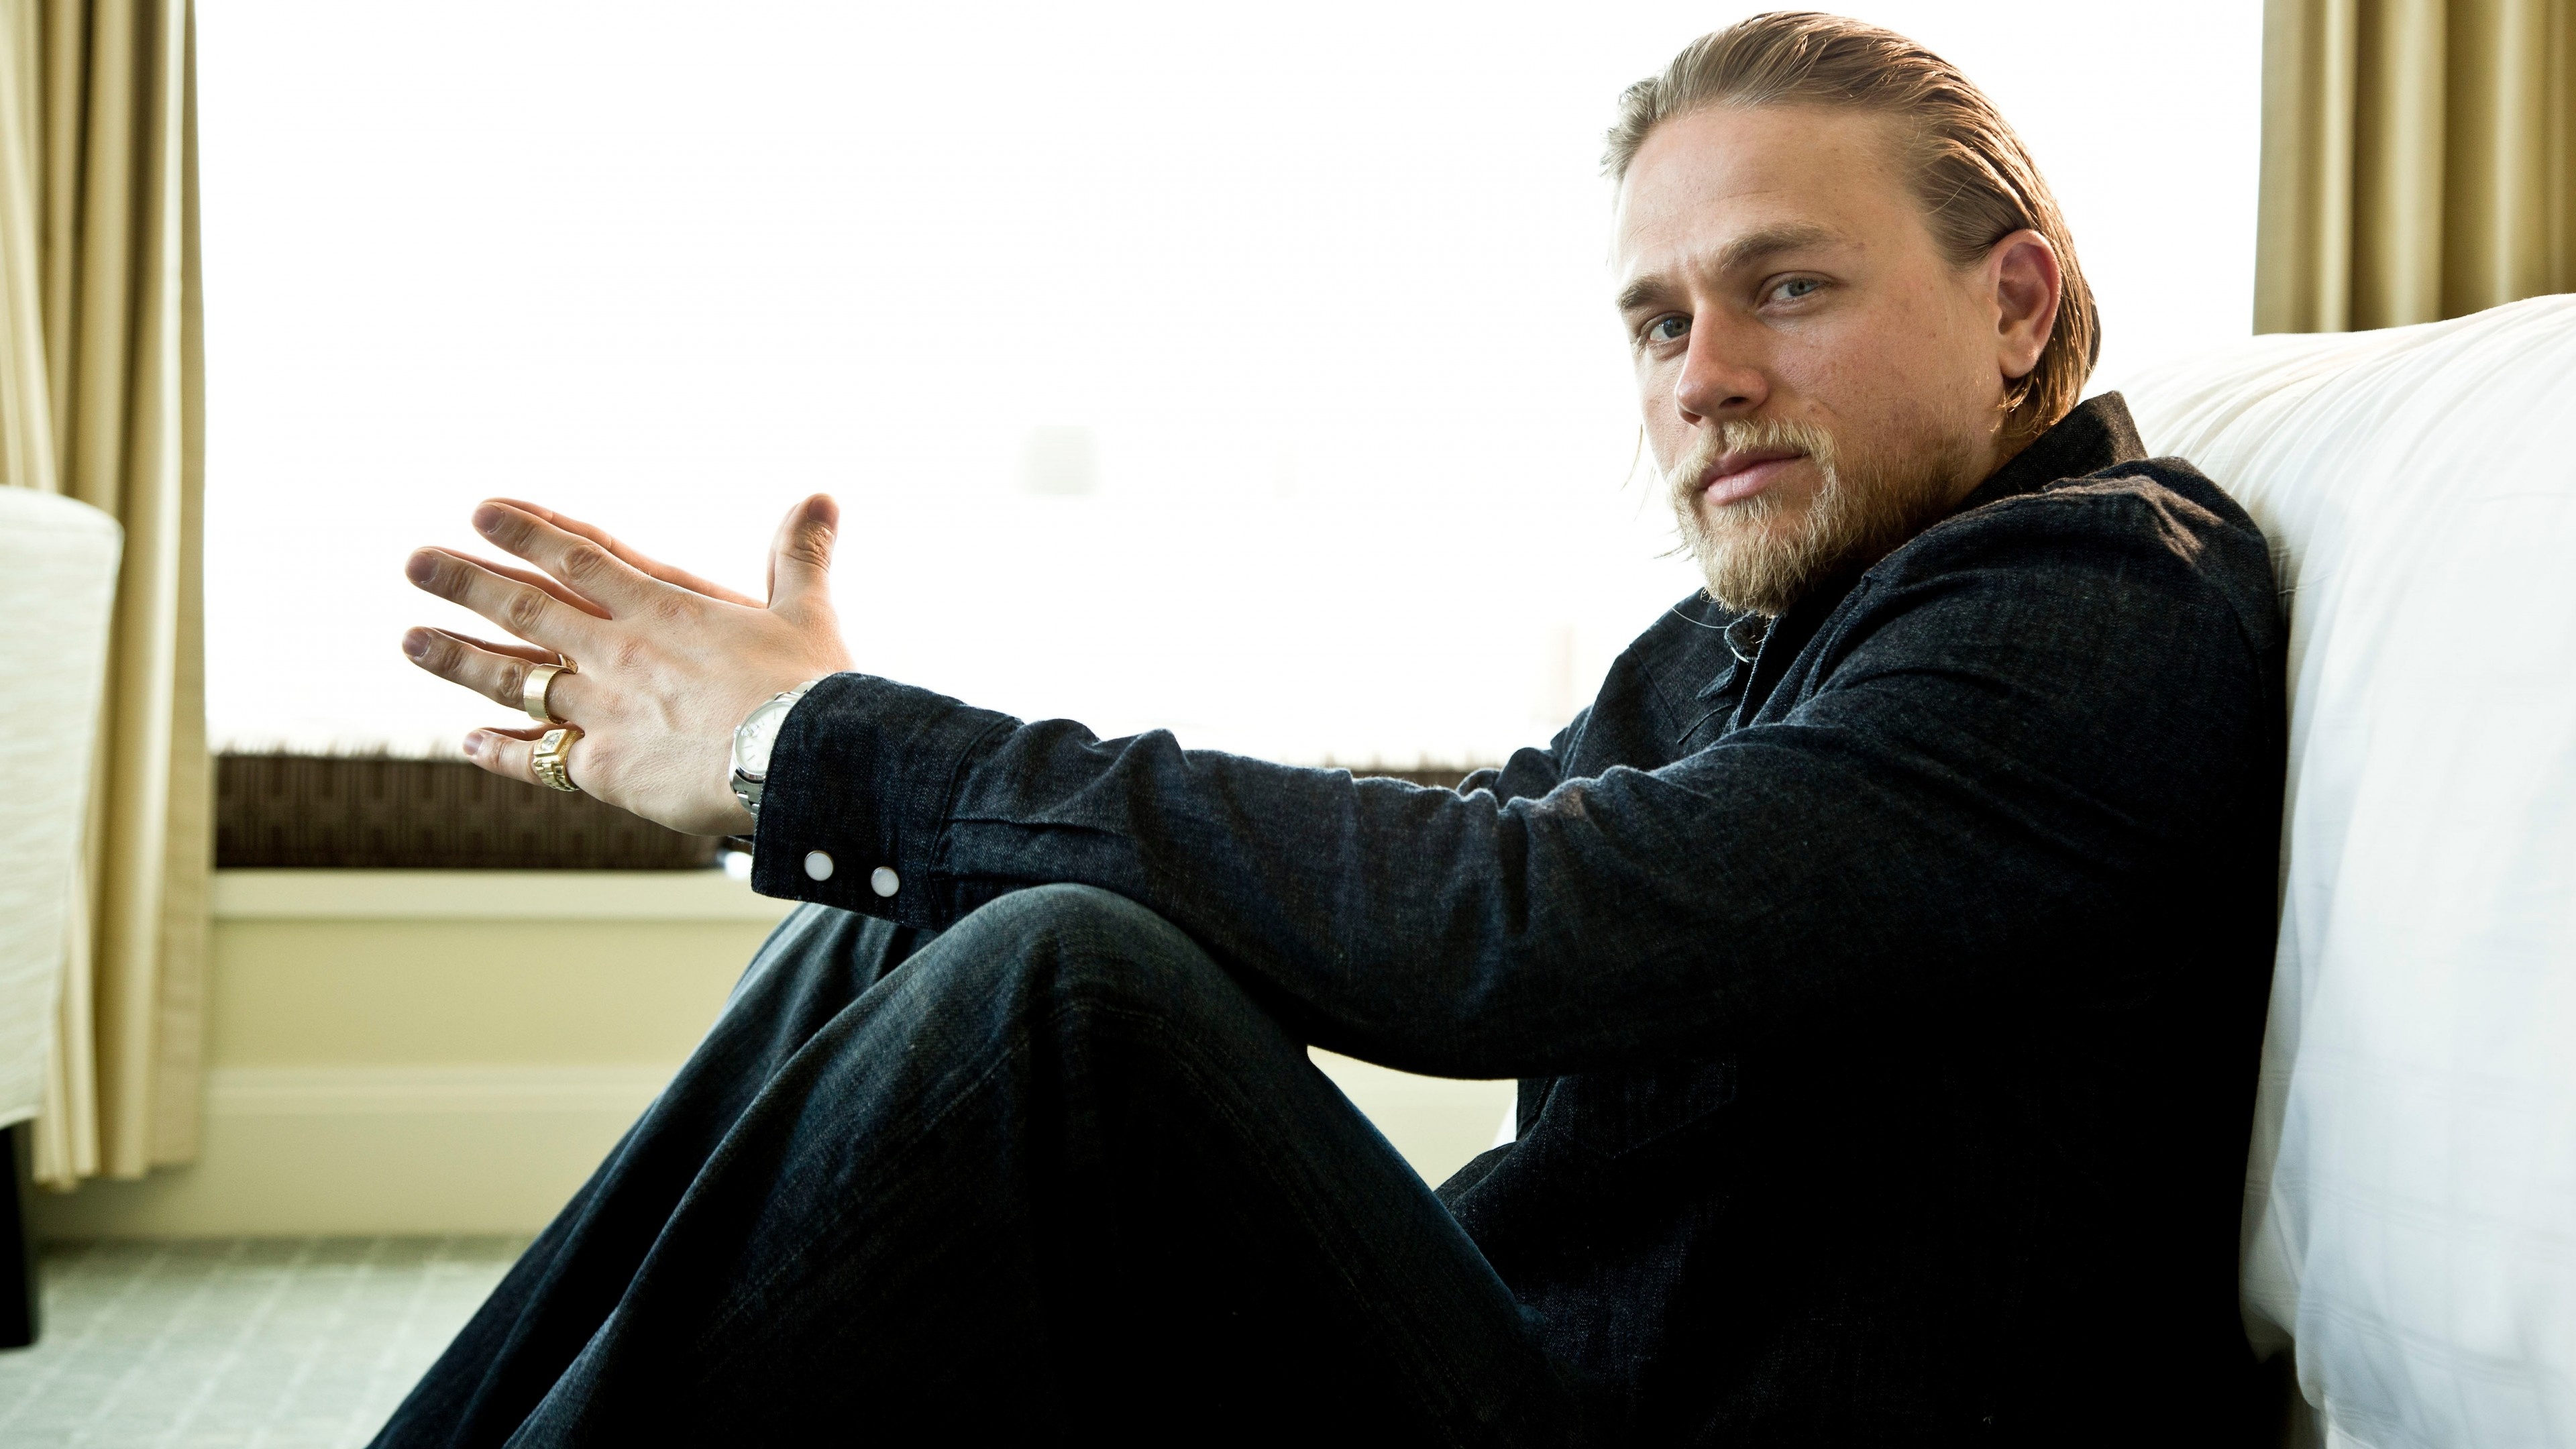 Charlie Hunnam: Best known for his roles as Pete Dunham in Green Street Hooligans (2005). 3840x2160 4K Wallpaper.